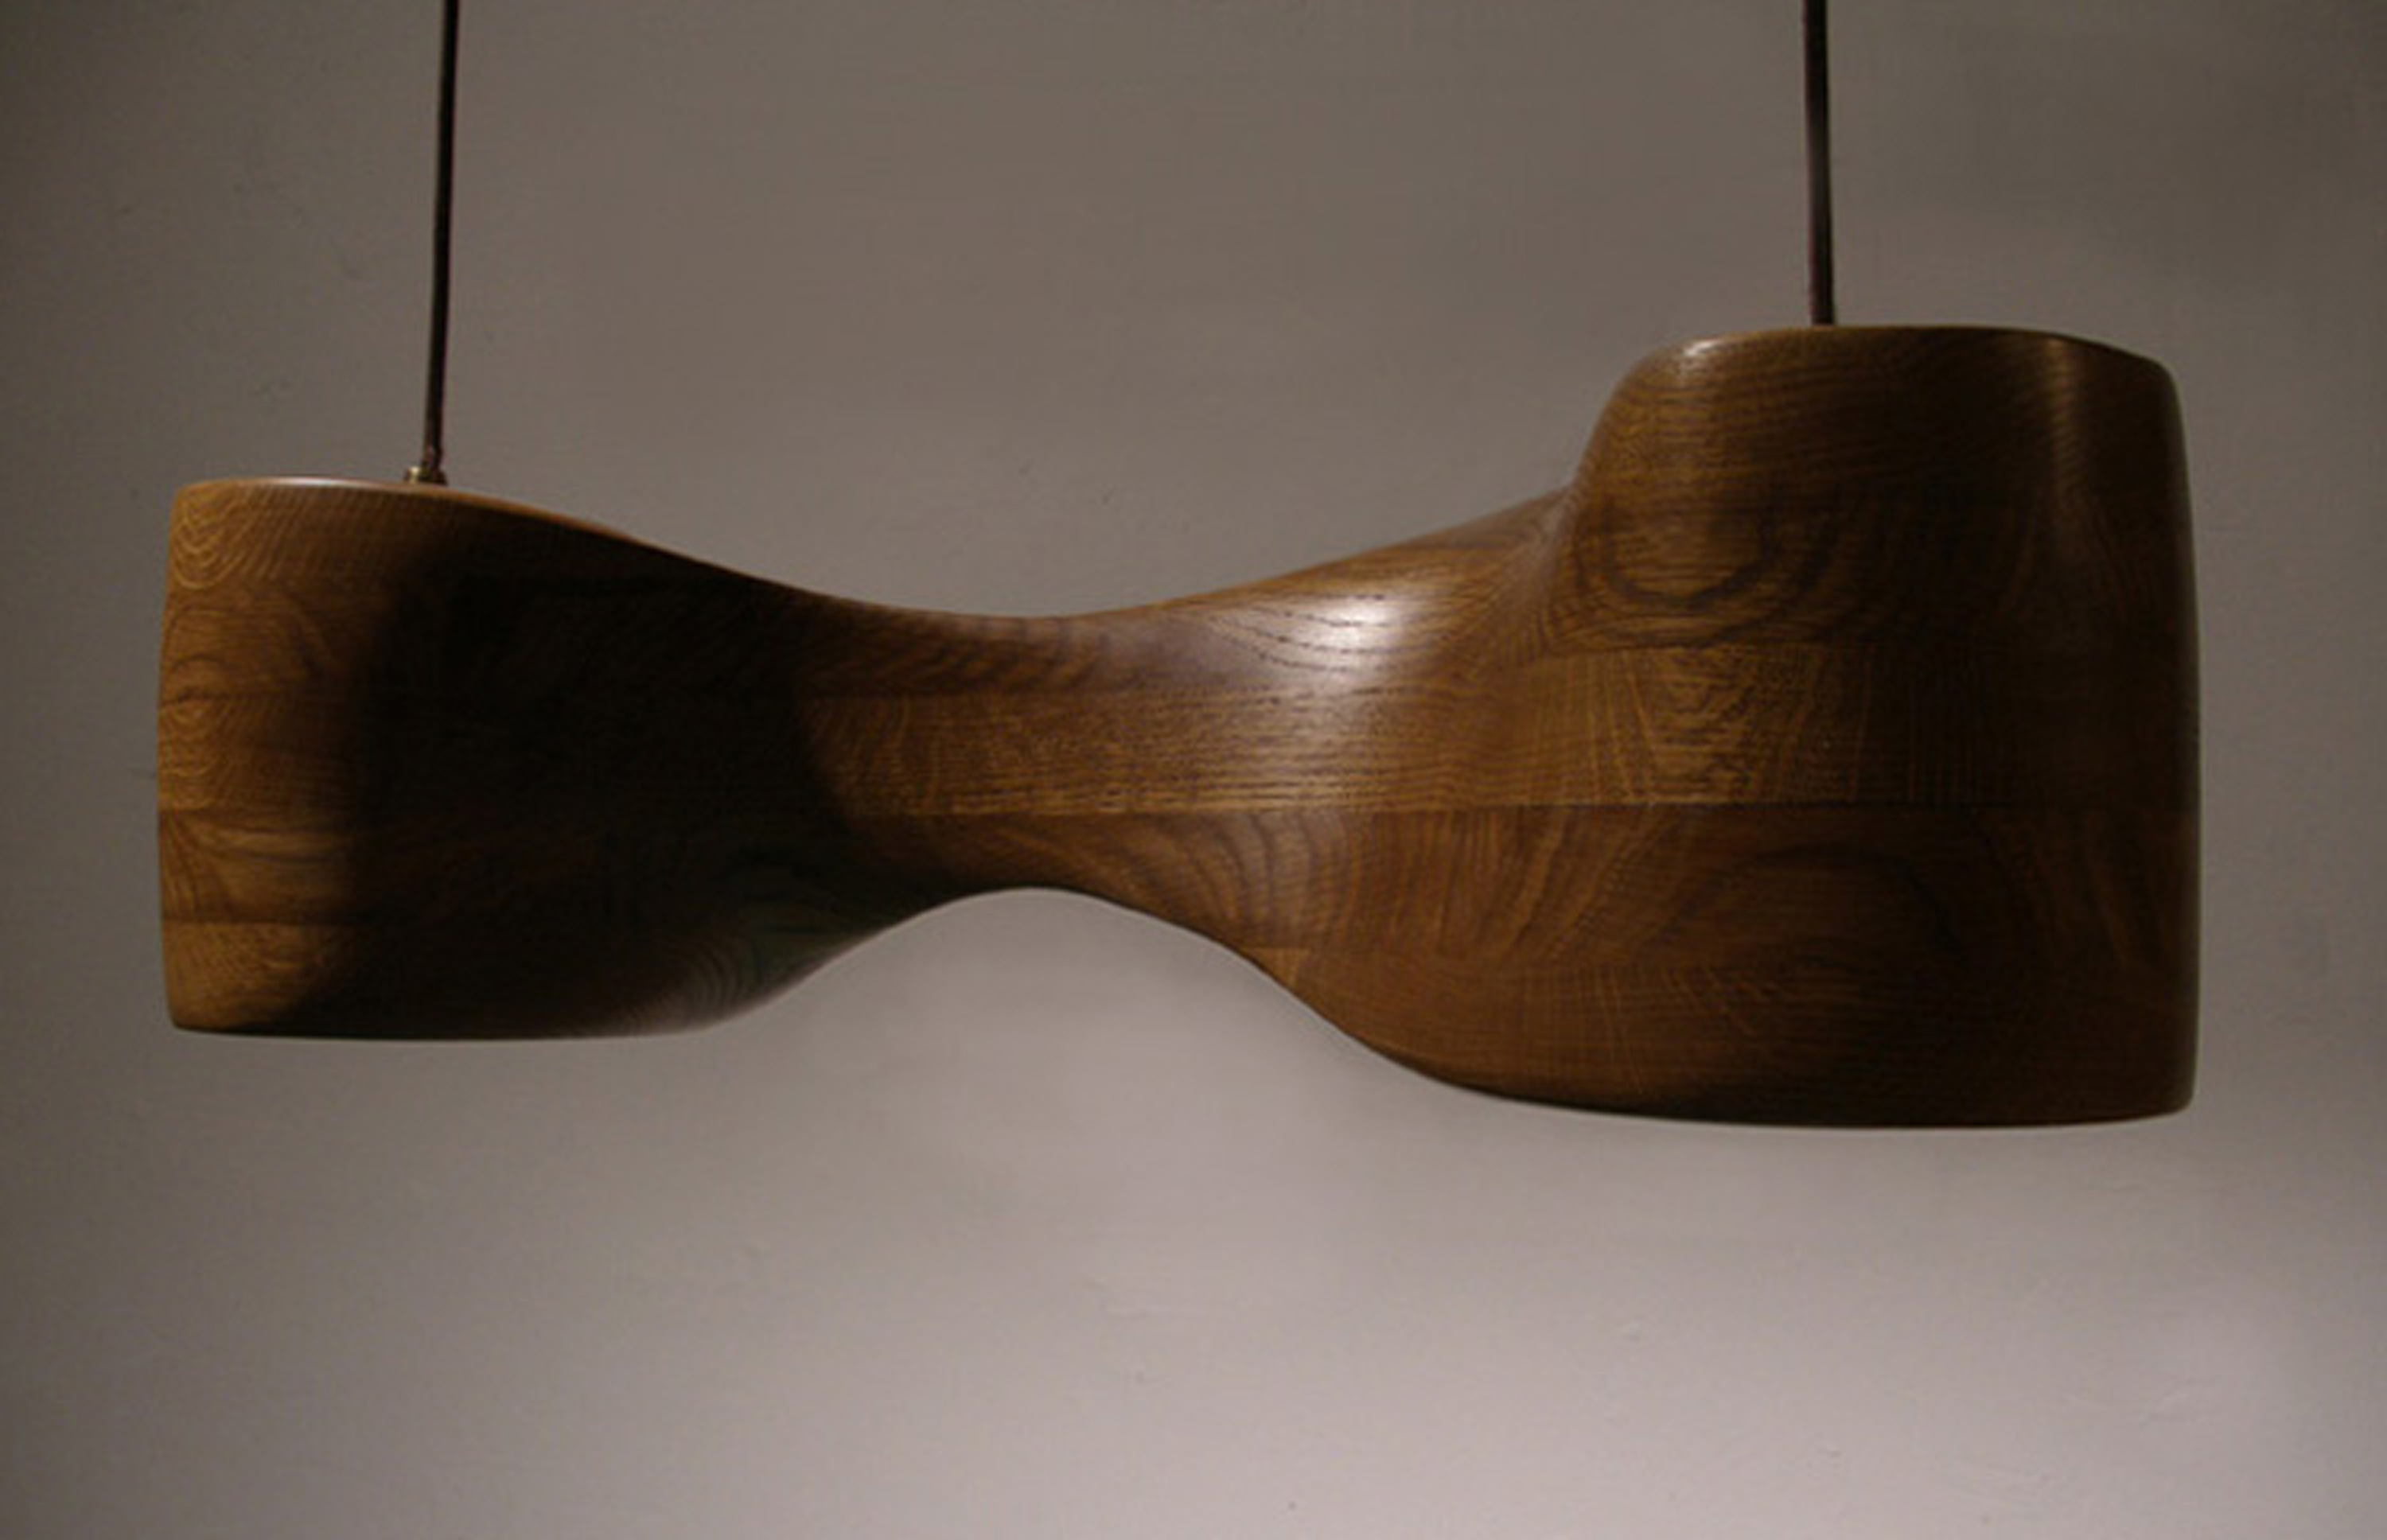 Pendant lamp in oak, sculpted by hand, shown from straight on